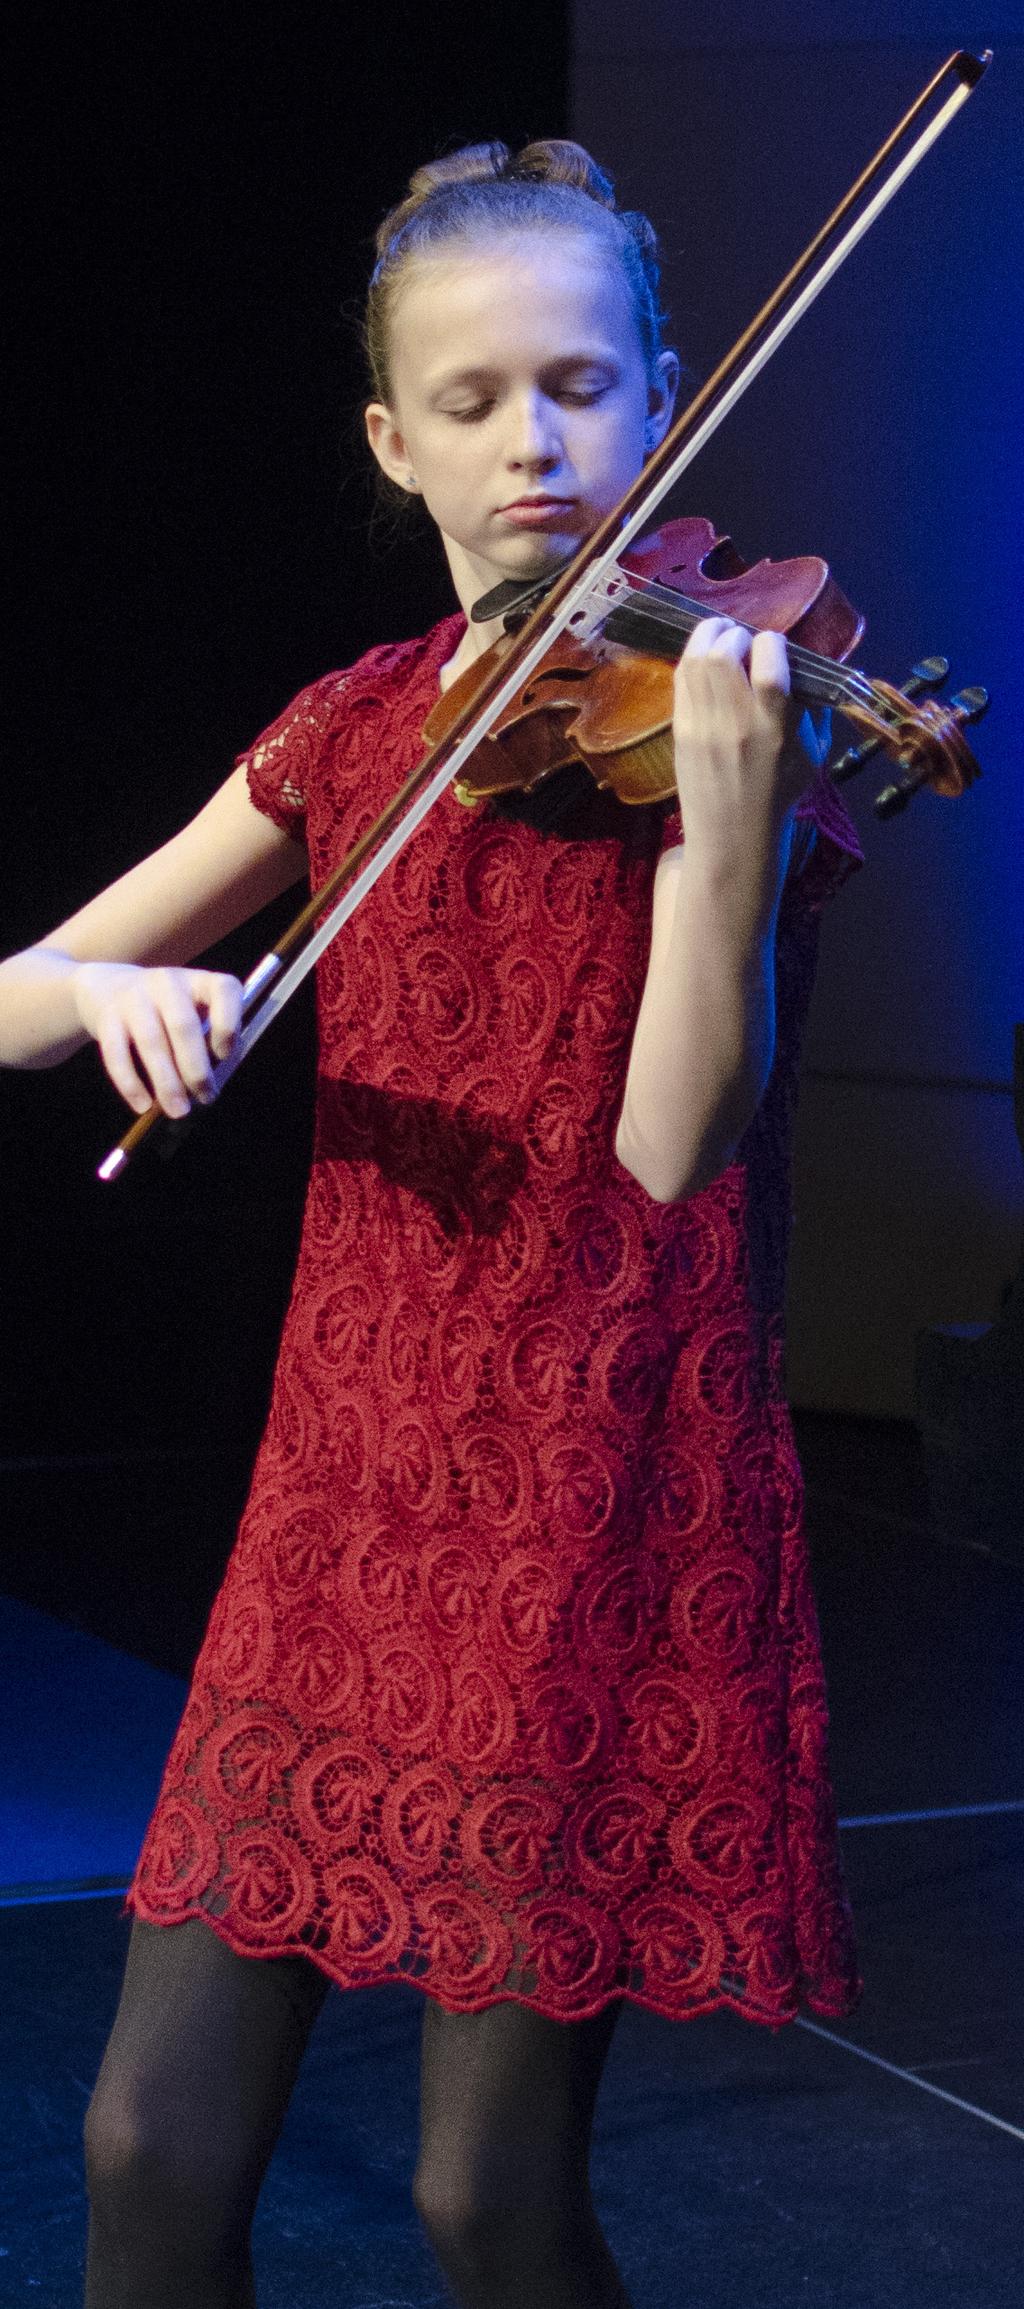 CHARLOTTE MARCKX, 12-YEAR-OLD VIOLINIST Above: Charlotte performs at From the Top s YouTube video shoot. At right: Charlotte performs the first movement, Moderato, from the Violin Sonata No.